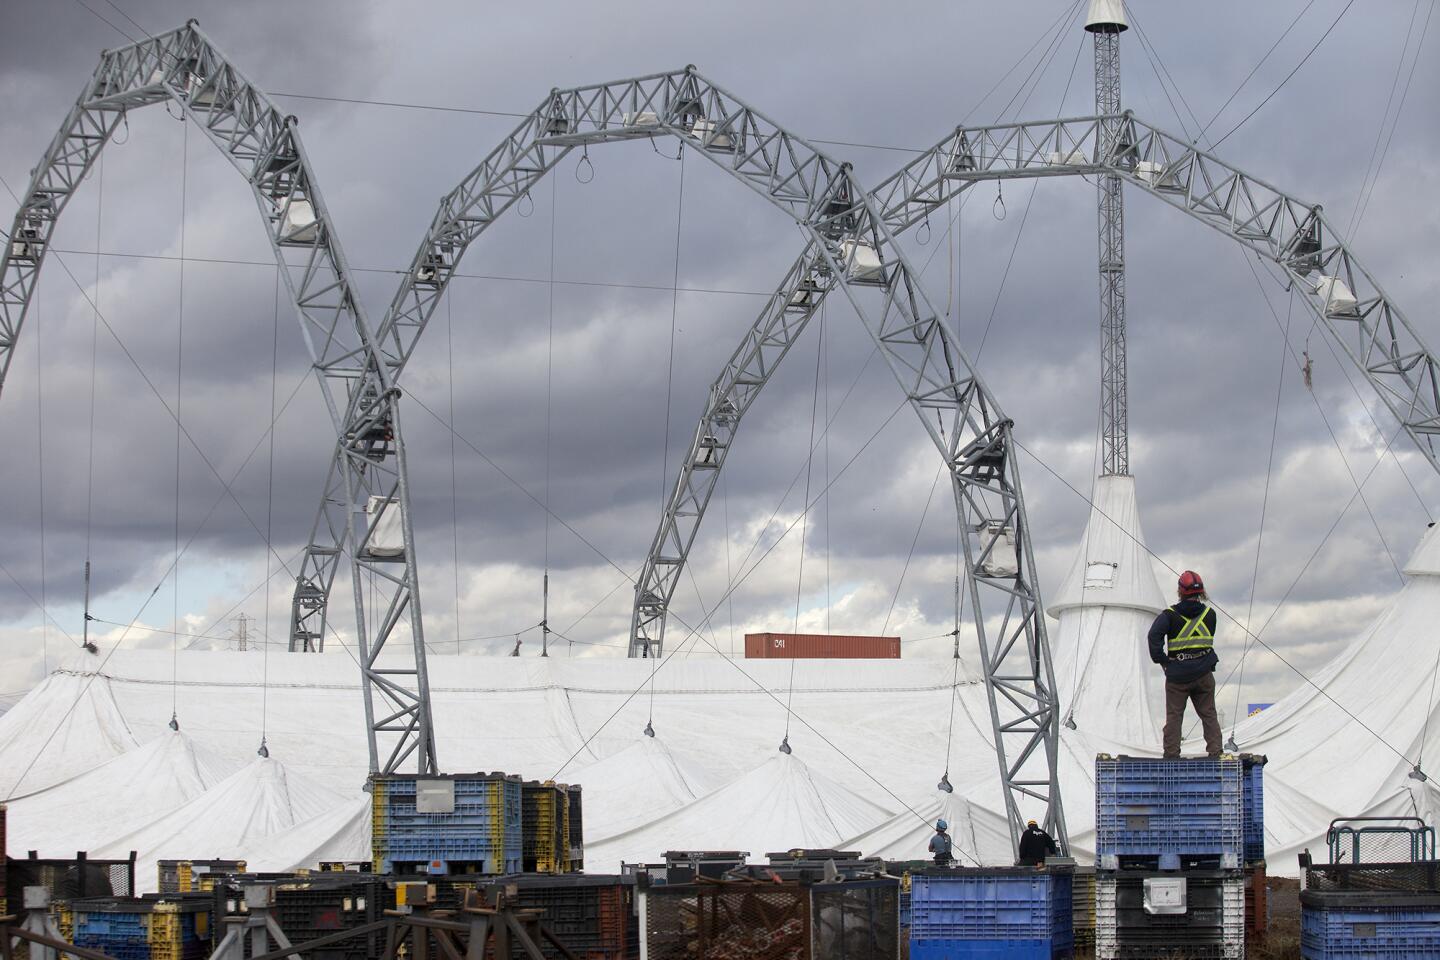 "Odysseo" tent goes up in Irvine